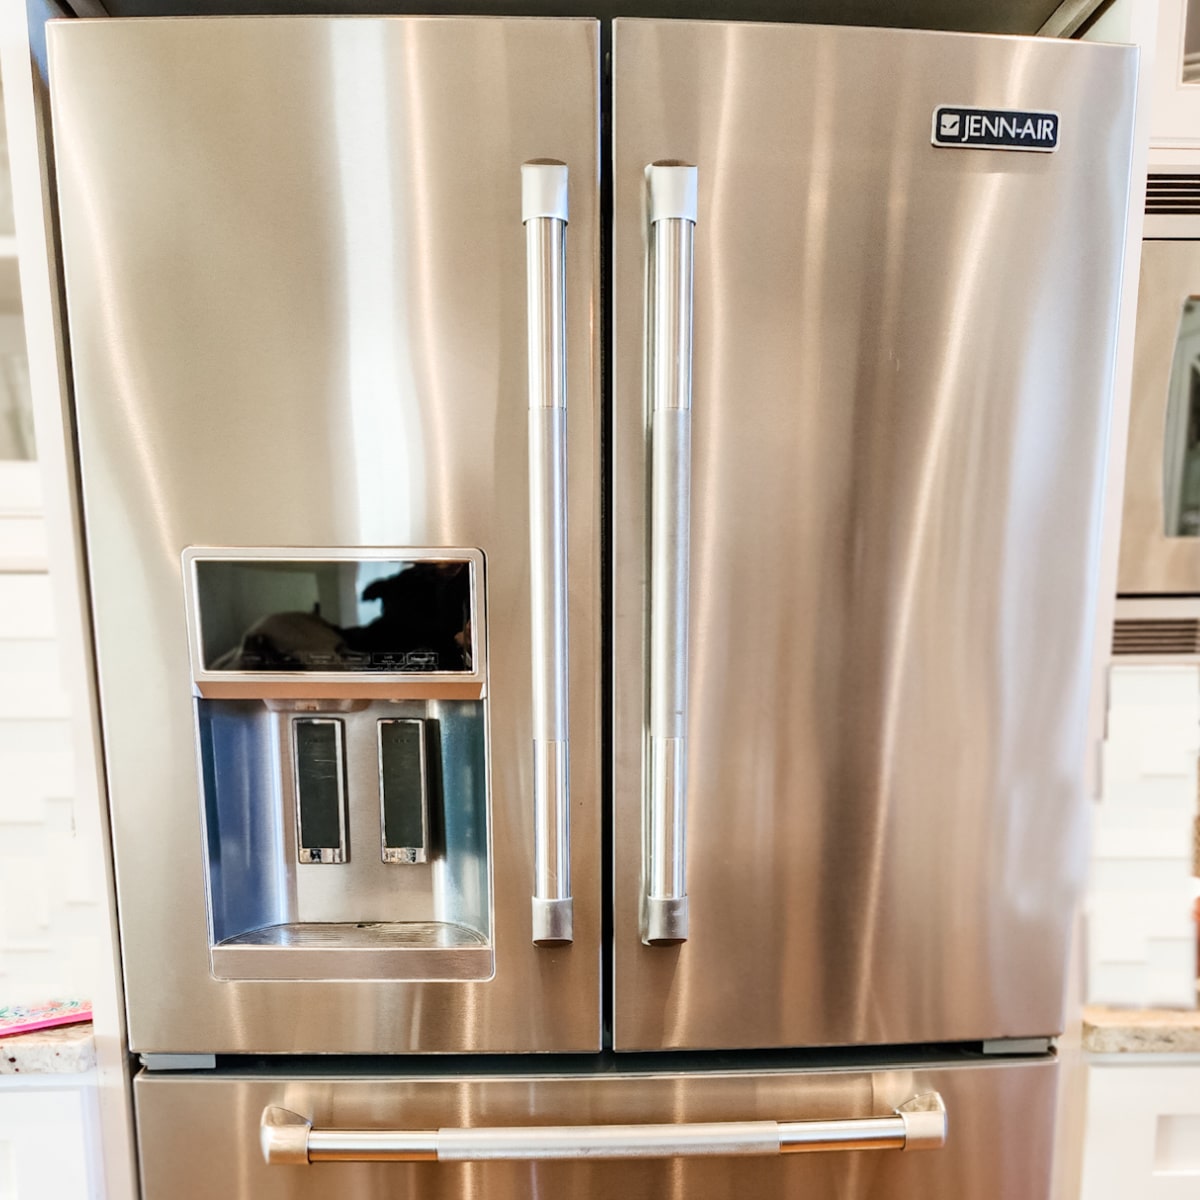 How to Clean Stainless Steel Appliances in 3 Ways